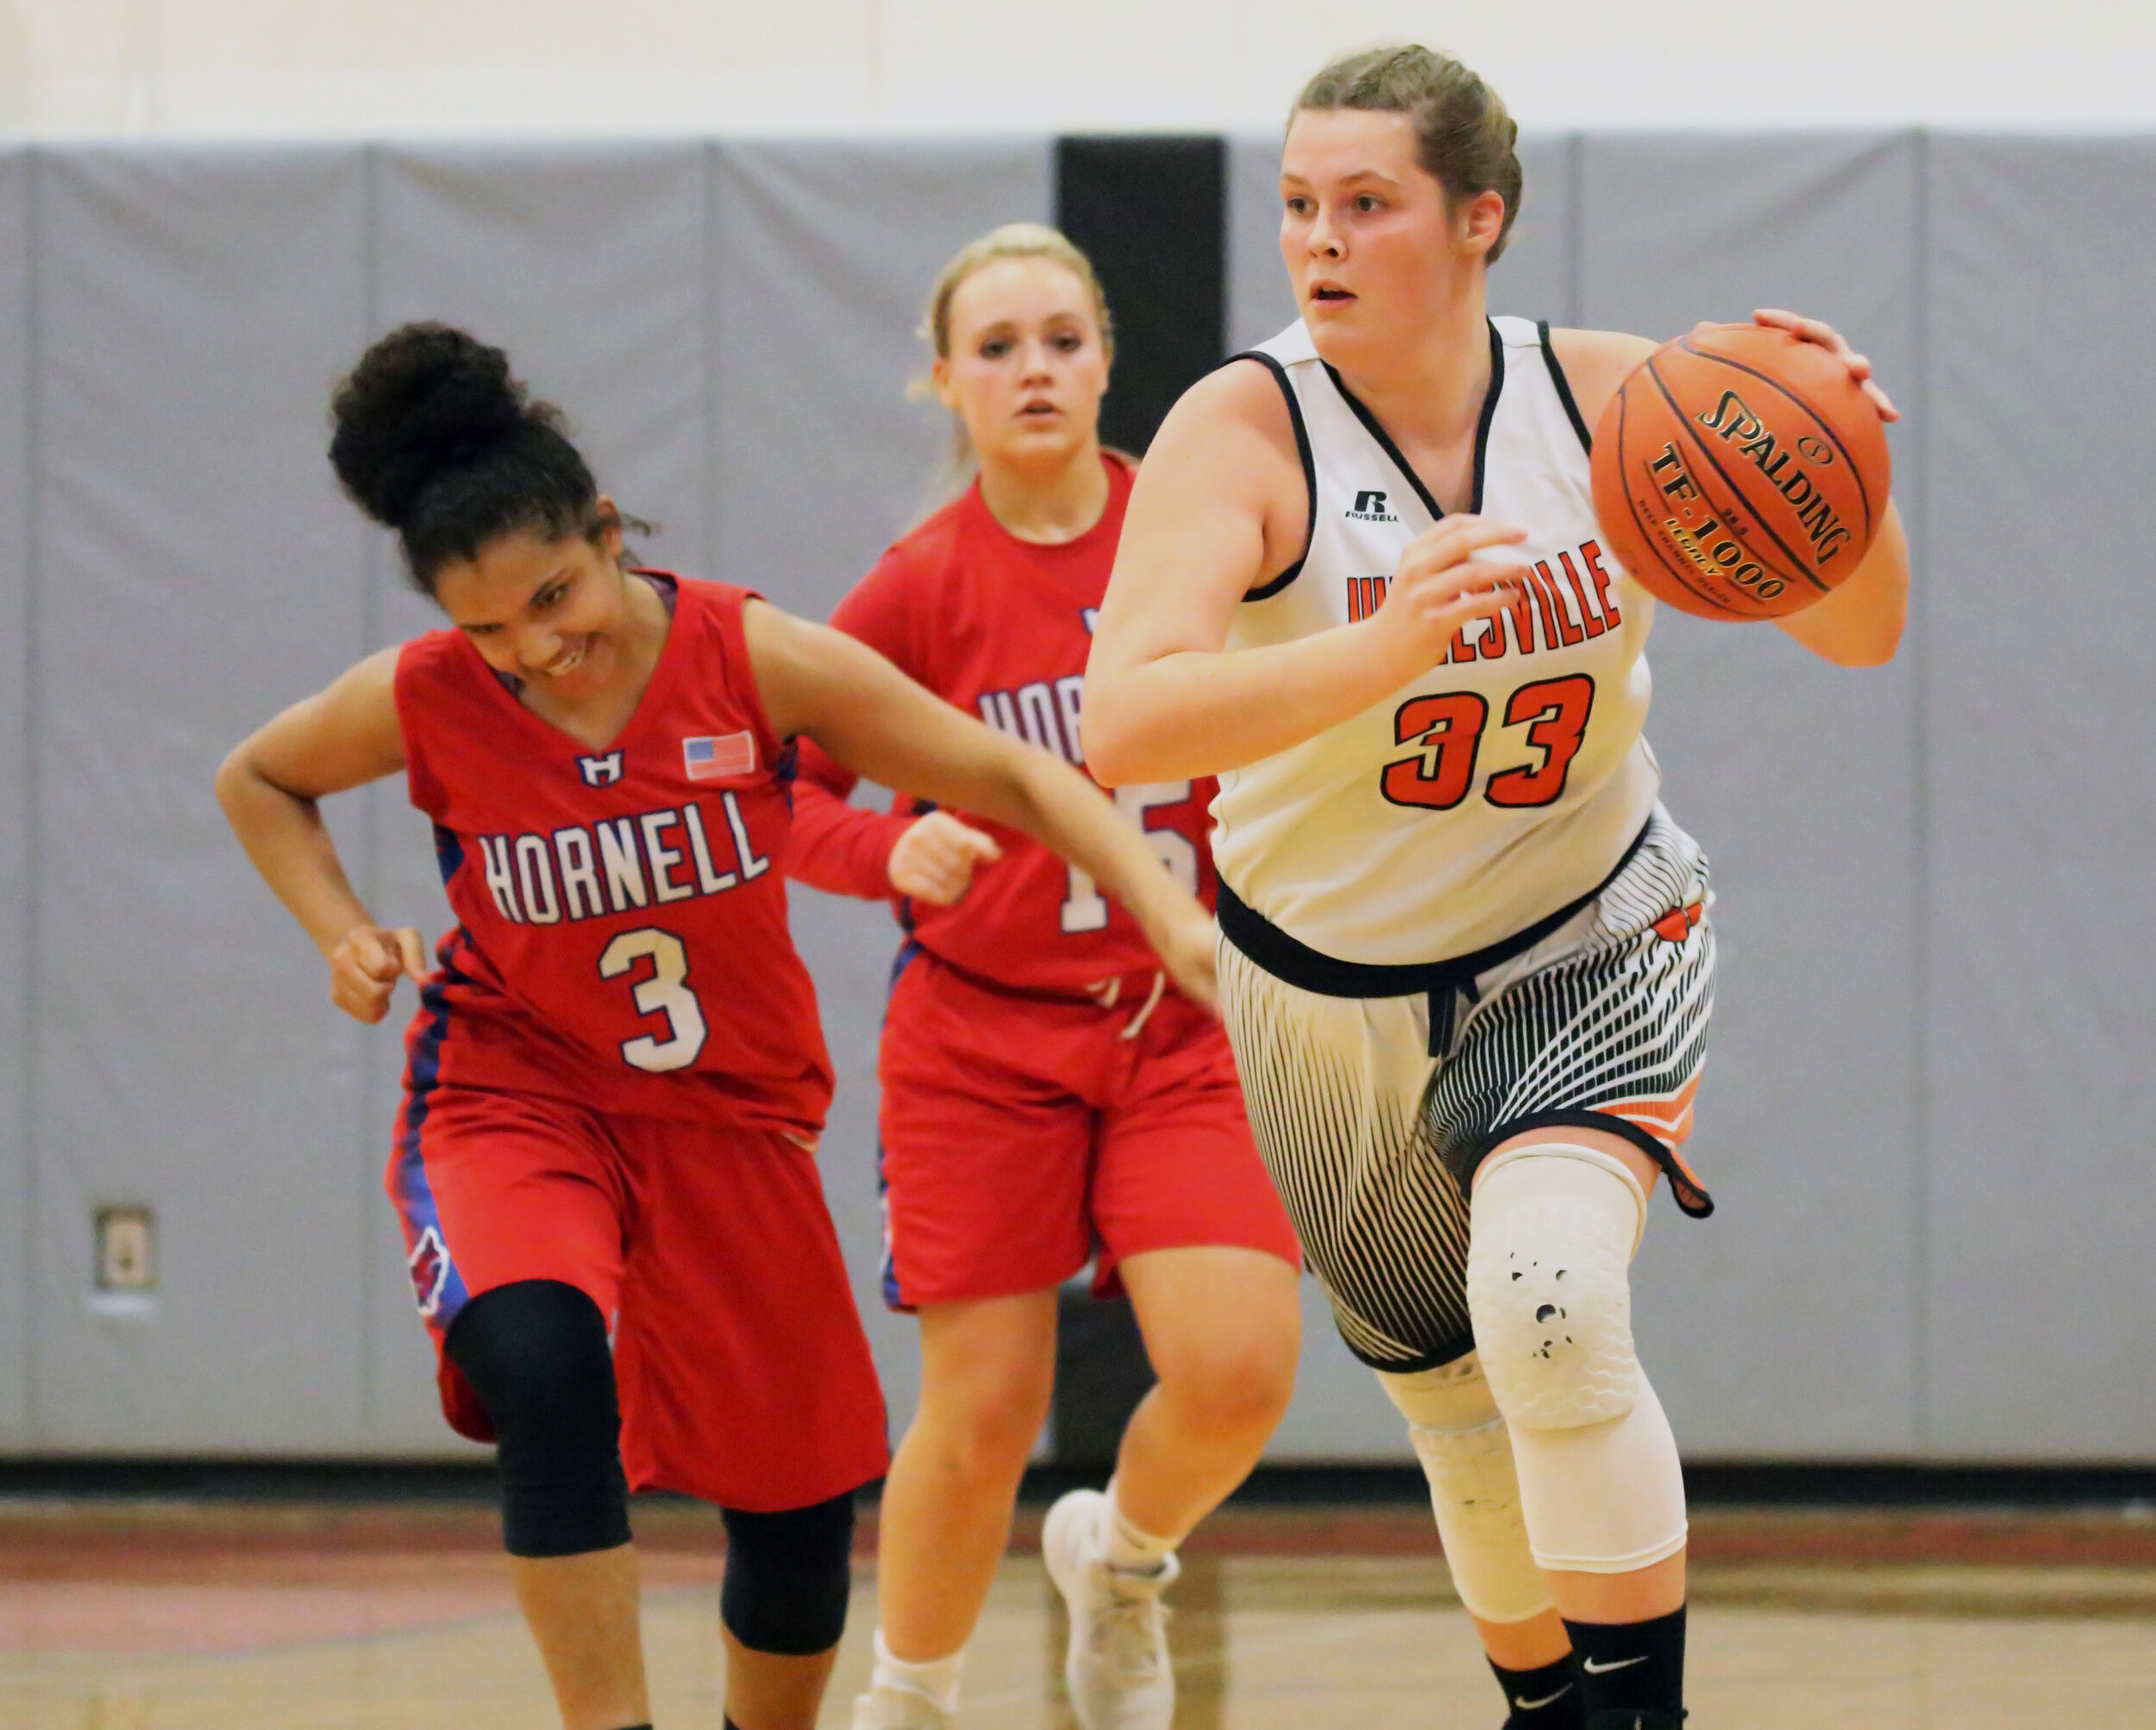  Wellsville senior Regan Marsh (33) pushes the pace down the court as the Hornell defense races back to challenge during Friday’s home contest. [Chris Brooks/WellsvilleSports.com] 